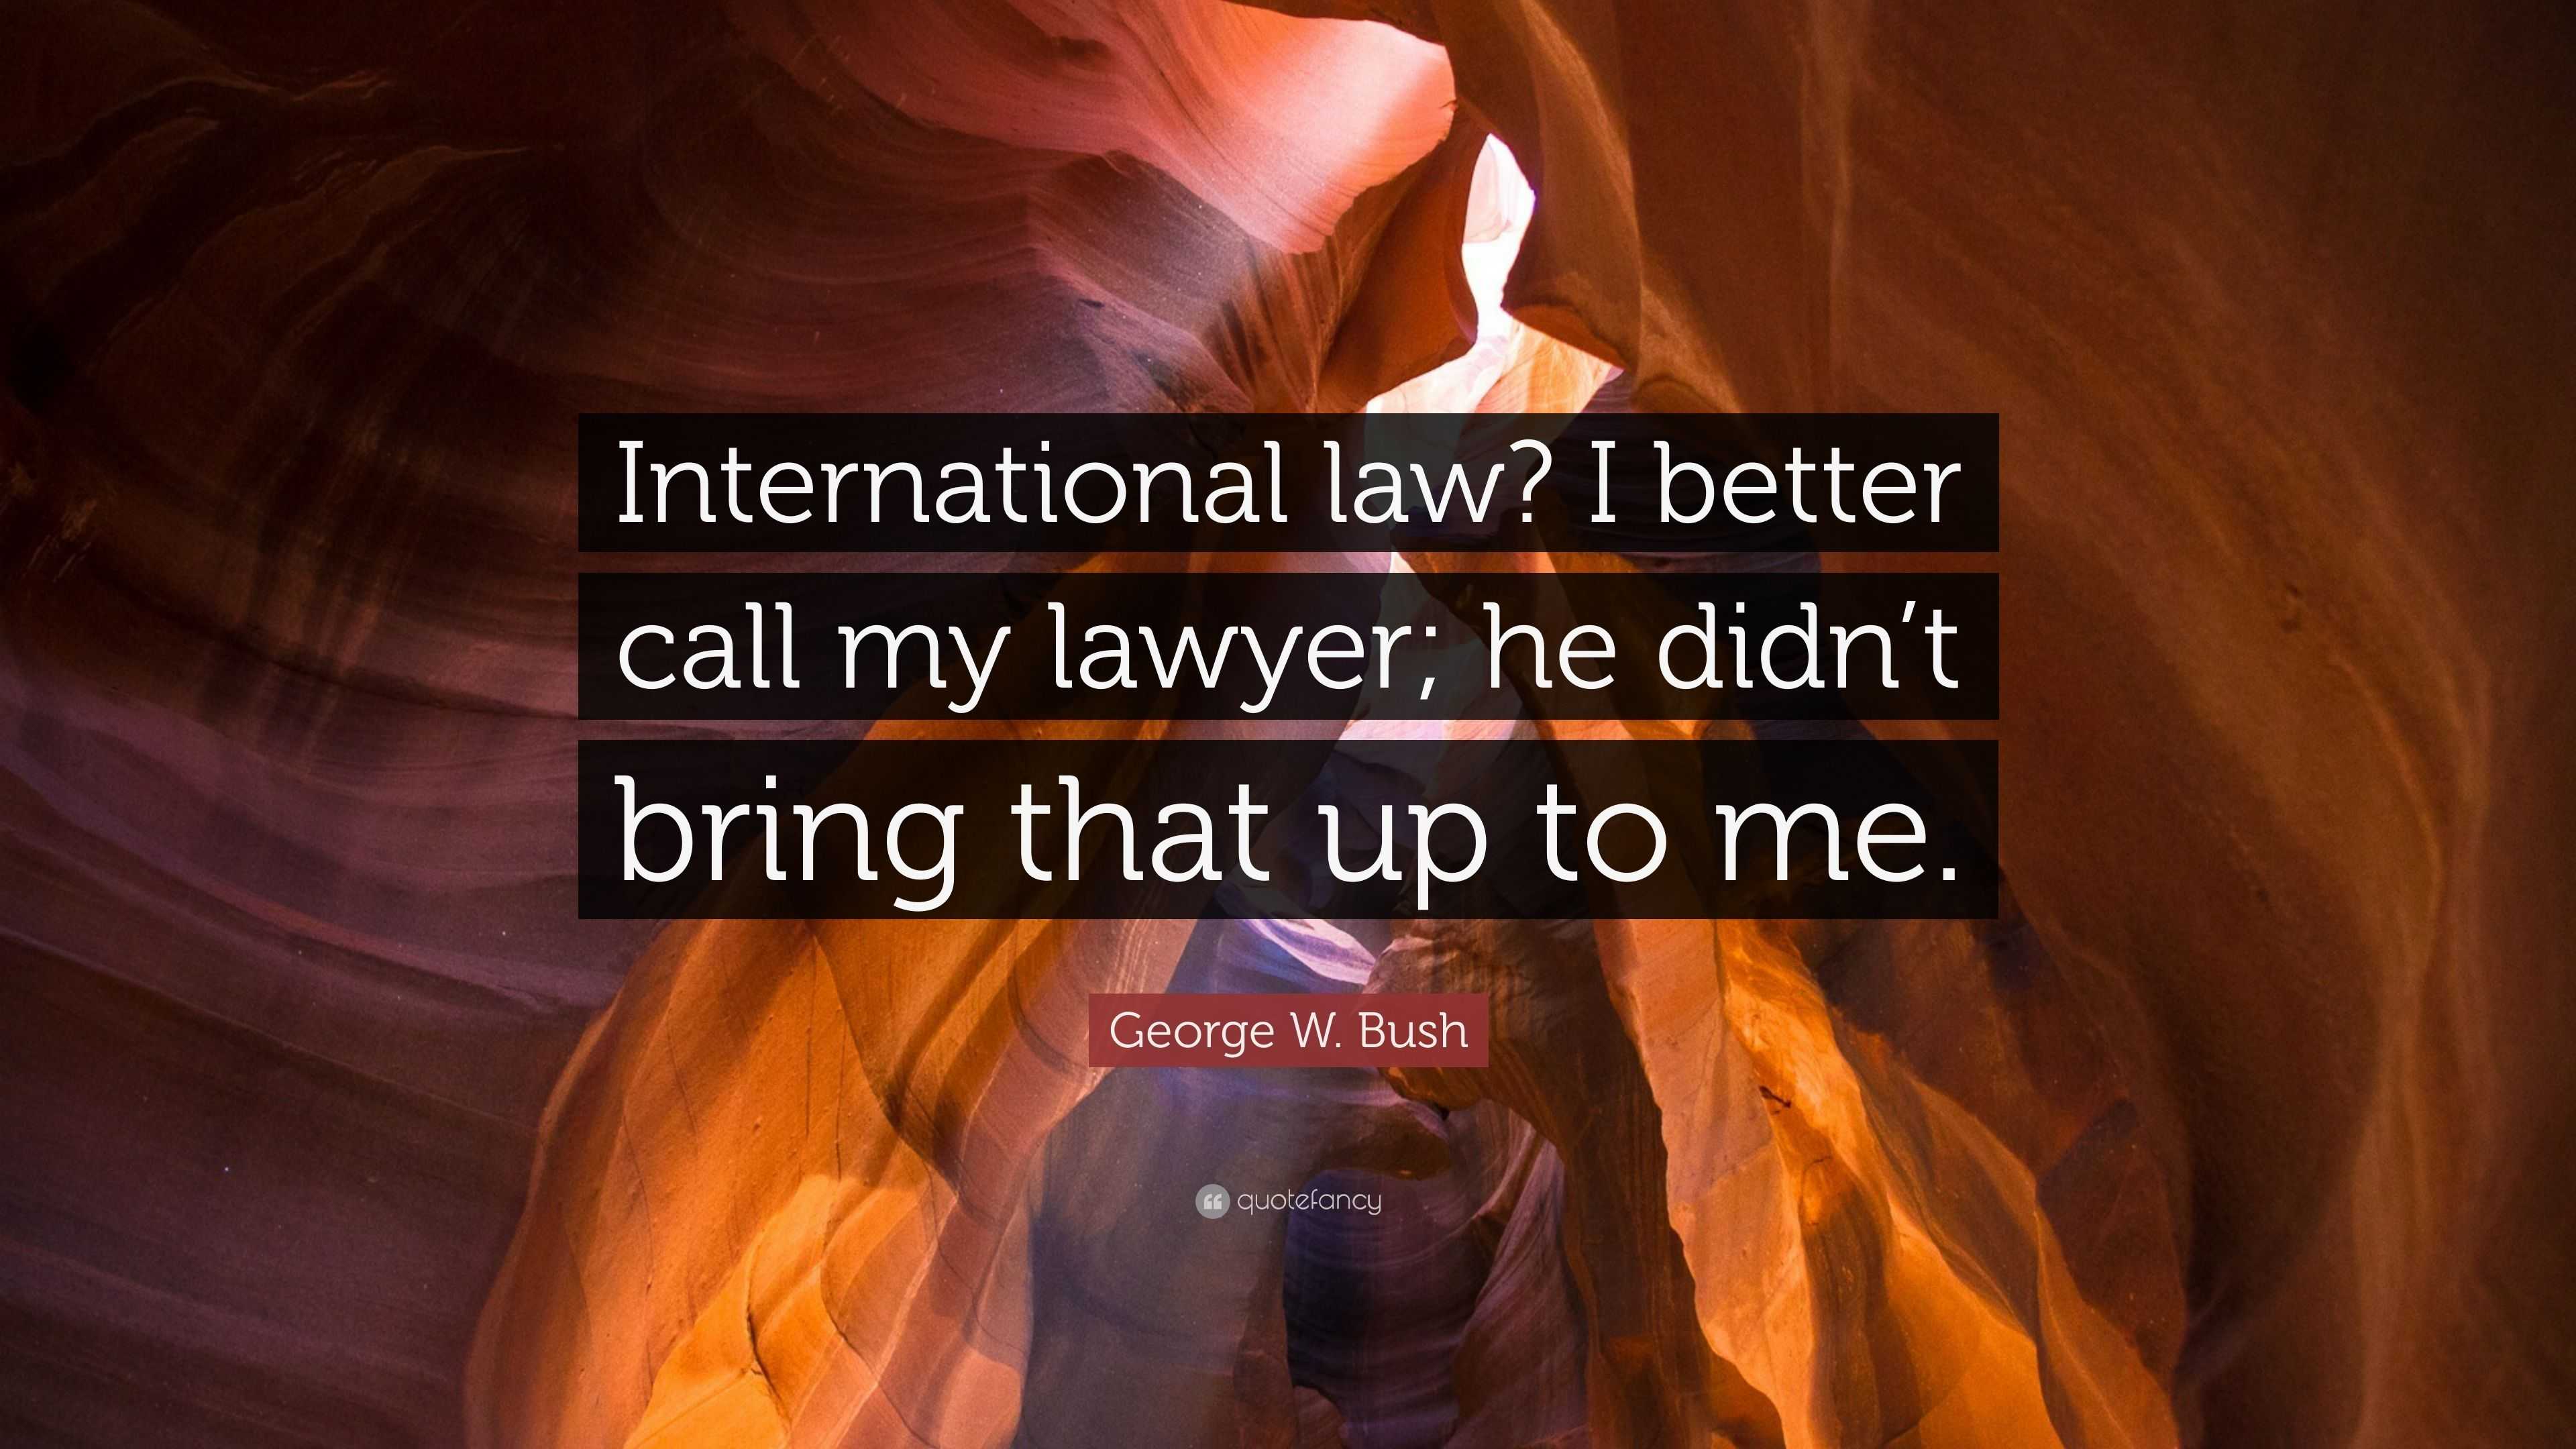 George W Bush Quote: International law? I better call my lawyer he